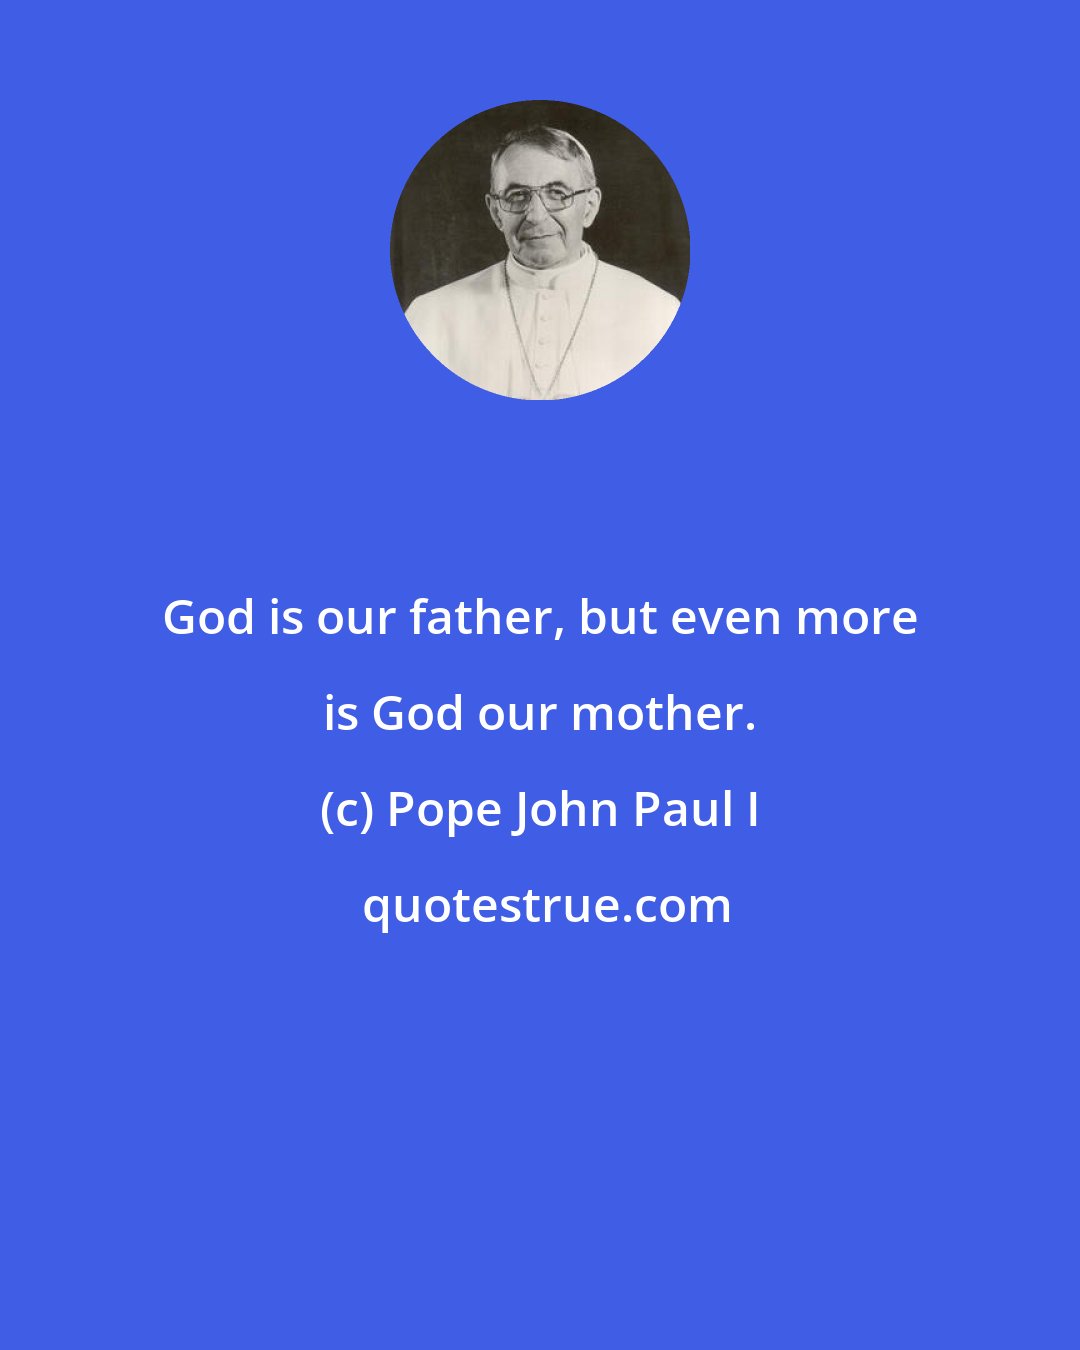 Pope John Paul I: God is our father, but even more is God our mother.